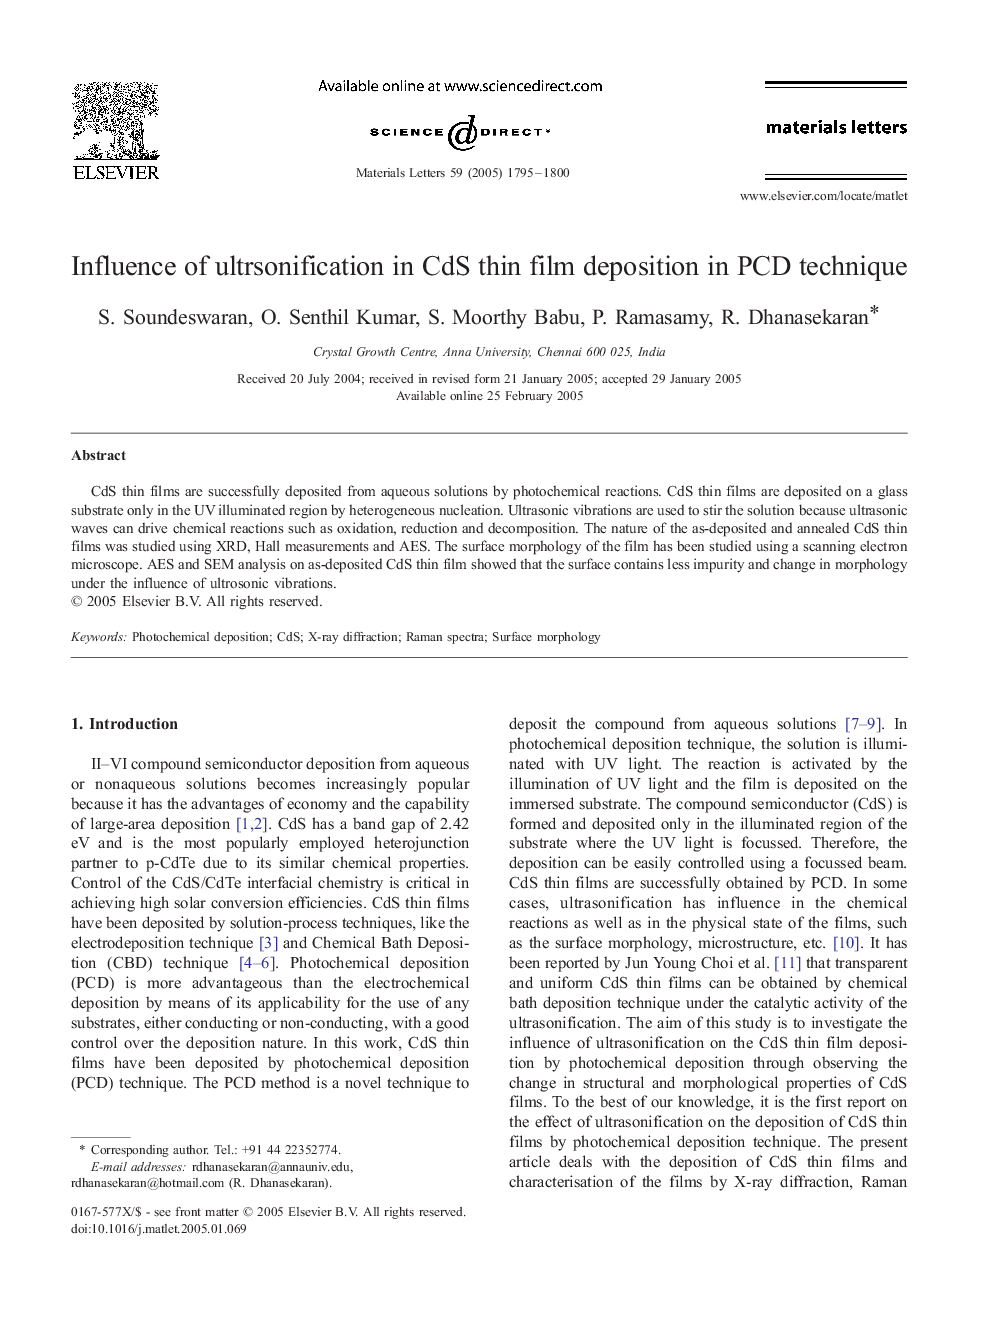 Influence of ultrsonification in CdS thin film deposition in PCD technique